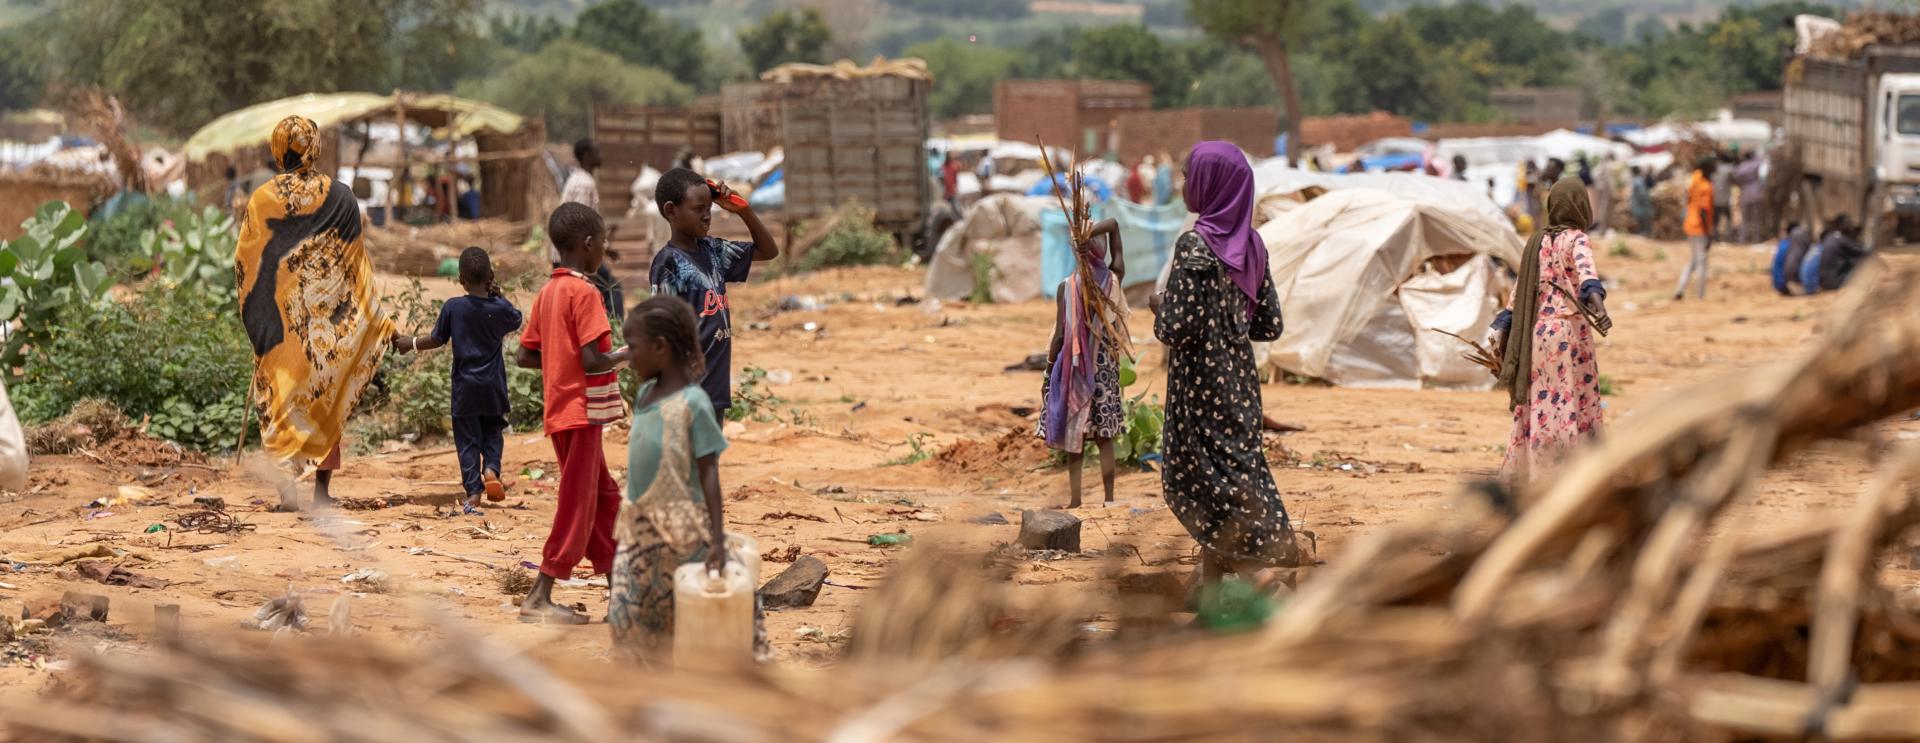 MSF appeals for immediate response to Sudanese refugee crisis in Chad.